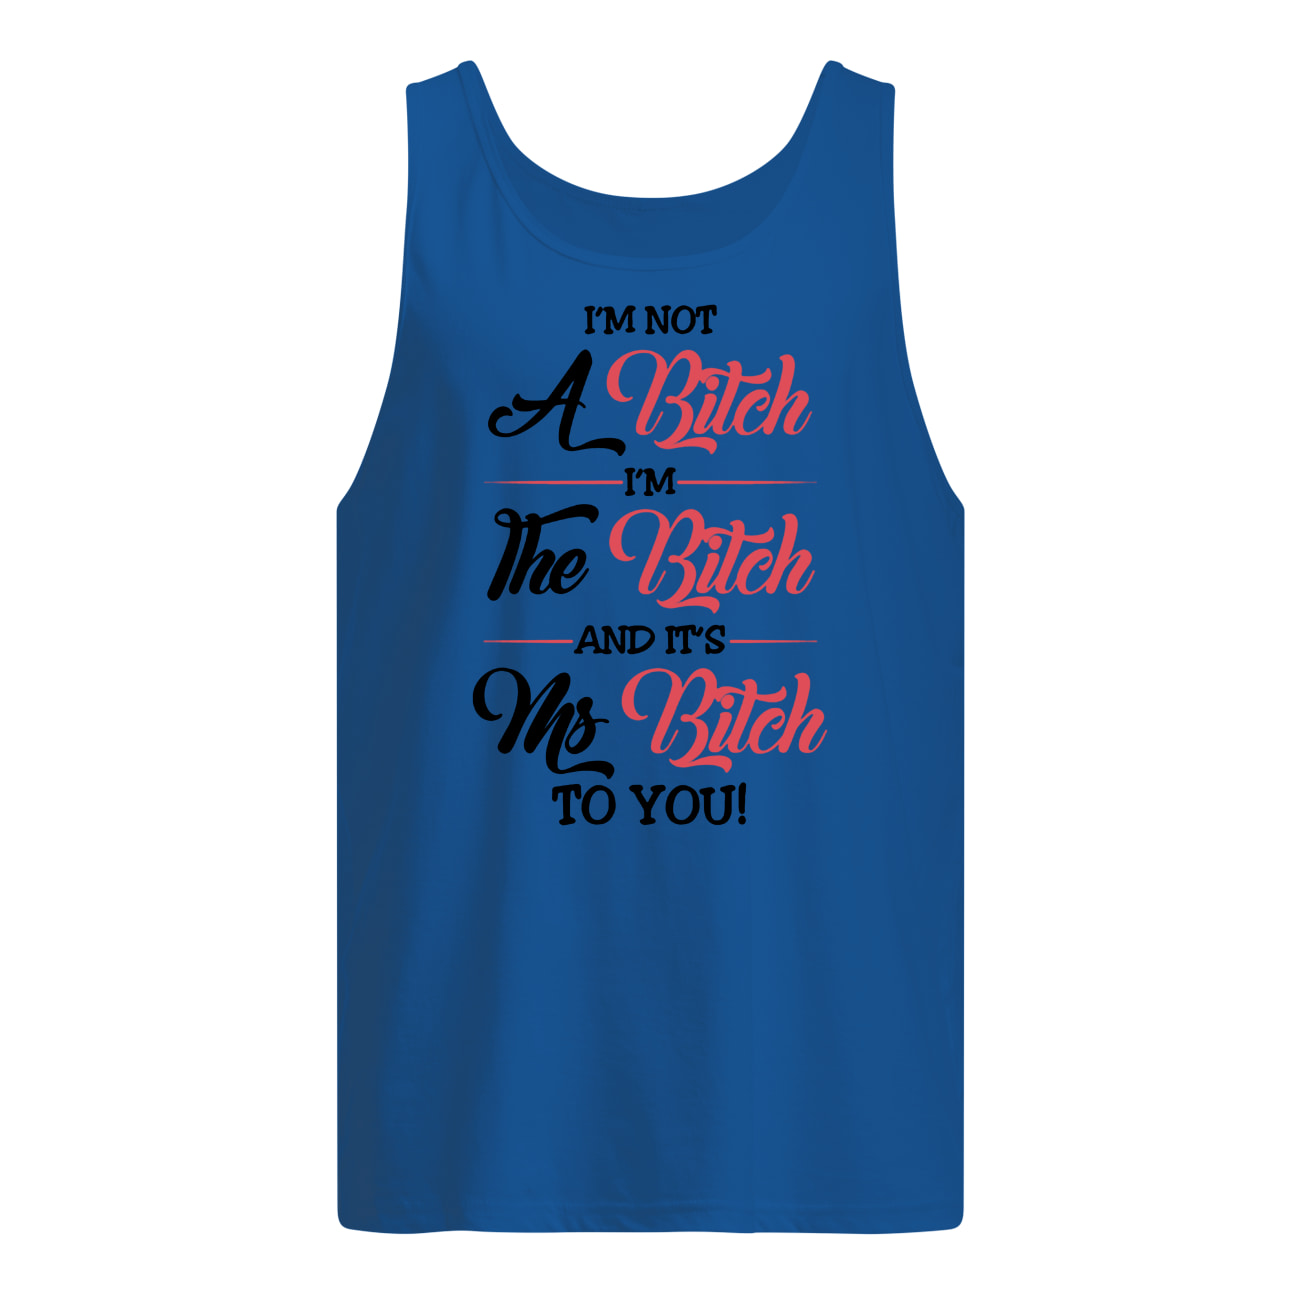 I'm not a bitch I'm the bitch and it's ms bitch to you tank top